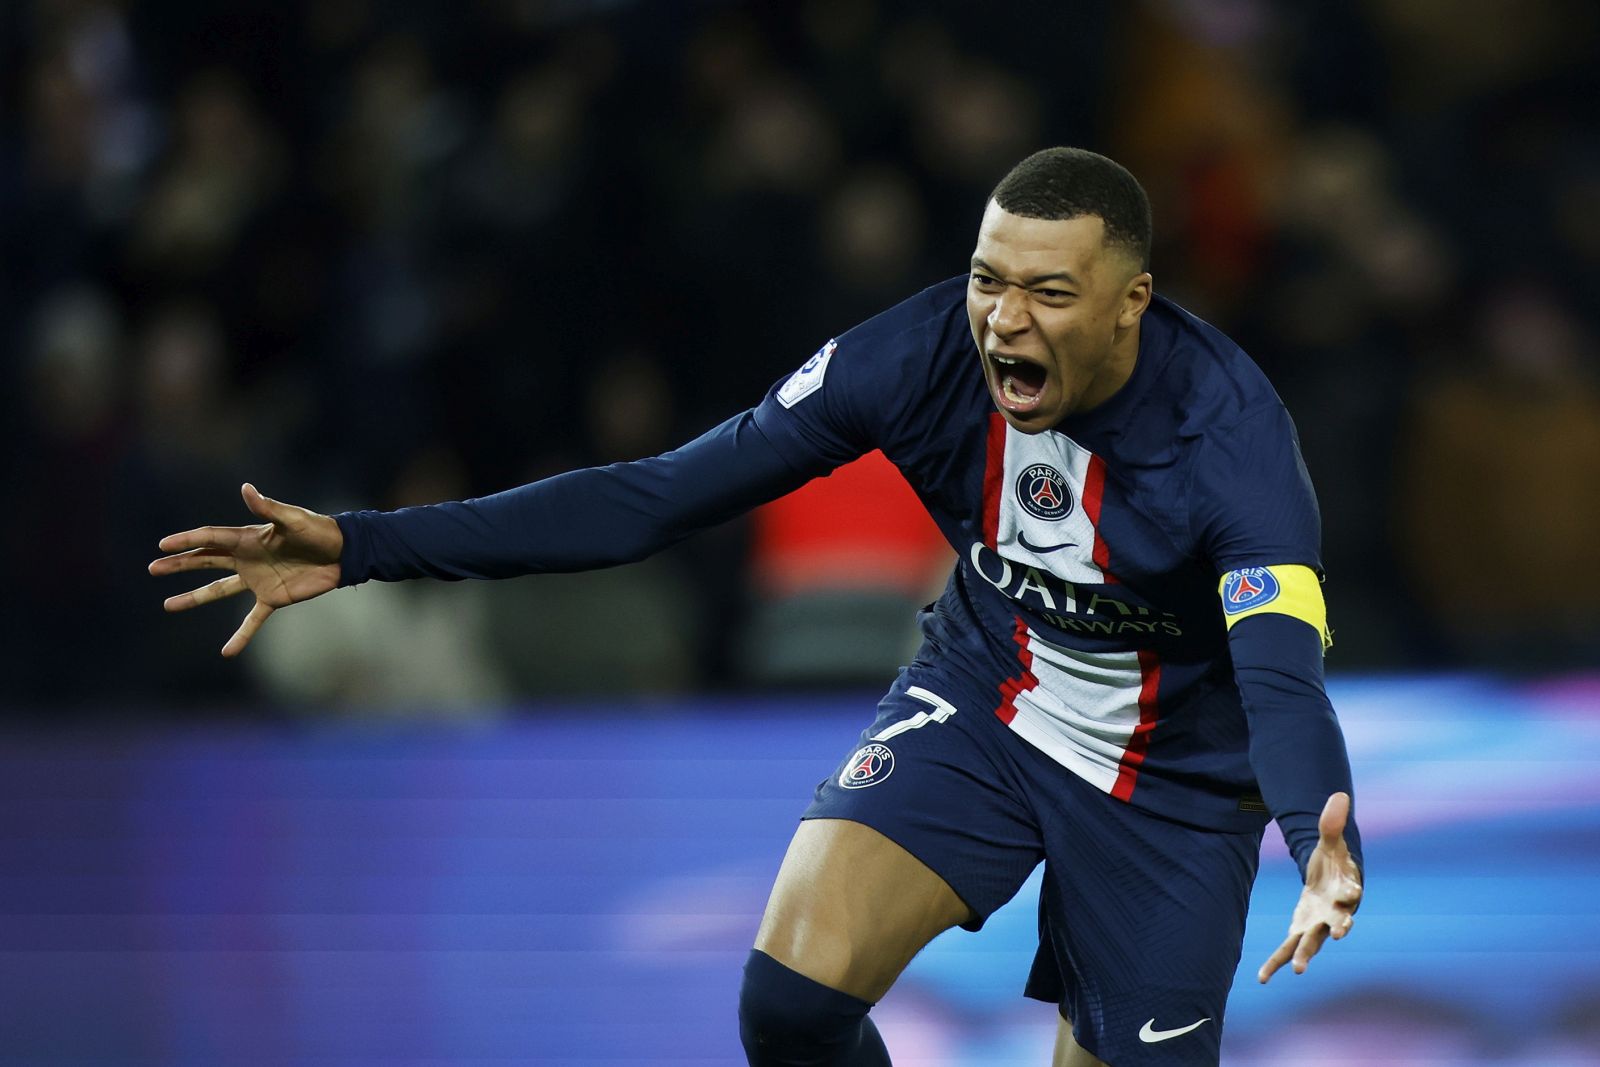 epa10503677 Paris Saint Germain's Kylian Mbappe celebrates scoring the 4-2 goal during the French Ligue 1 soccer match between PSG and FC Nantes, in Paris, France, 04 March 2023. Mbappe became the all time goal scorer for PSG with 201 goals.  EPA/YOAN VALAT